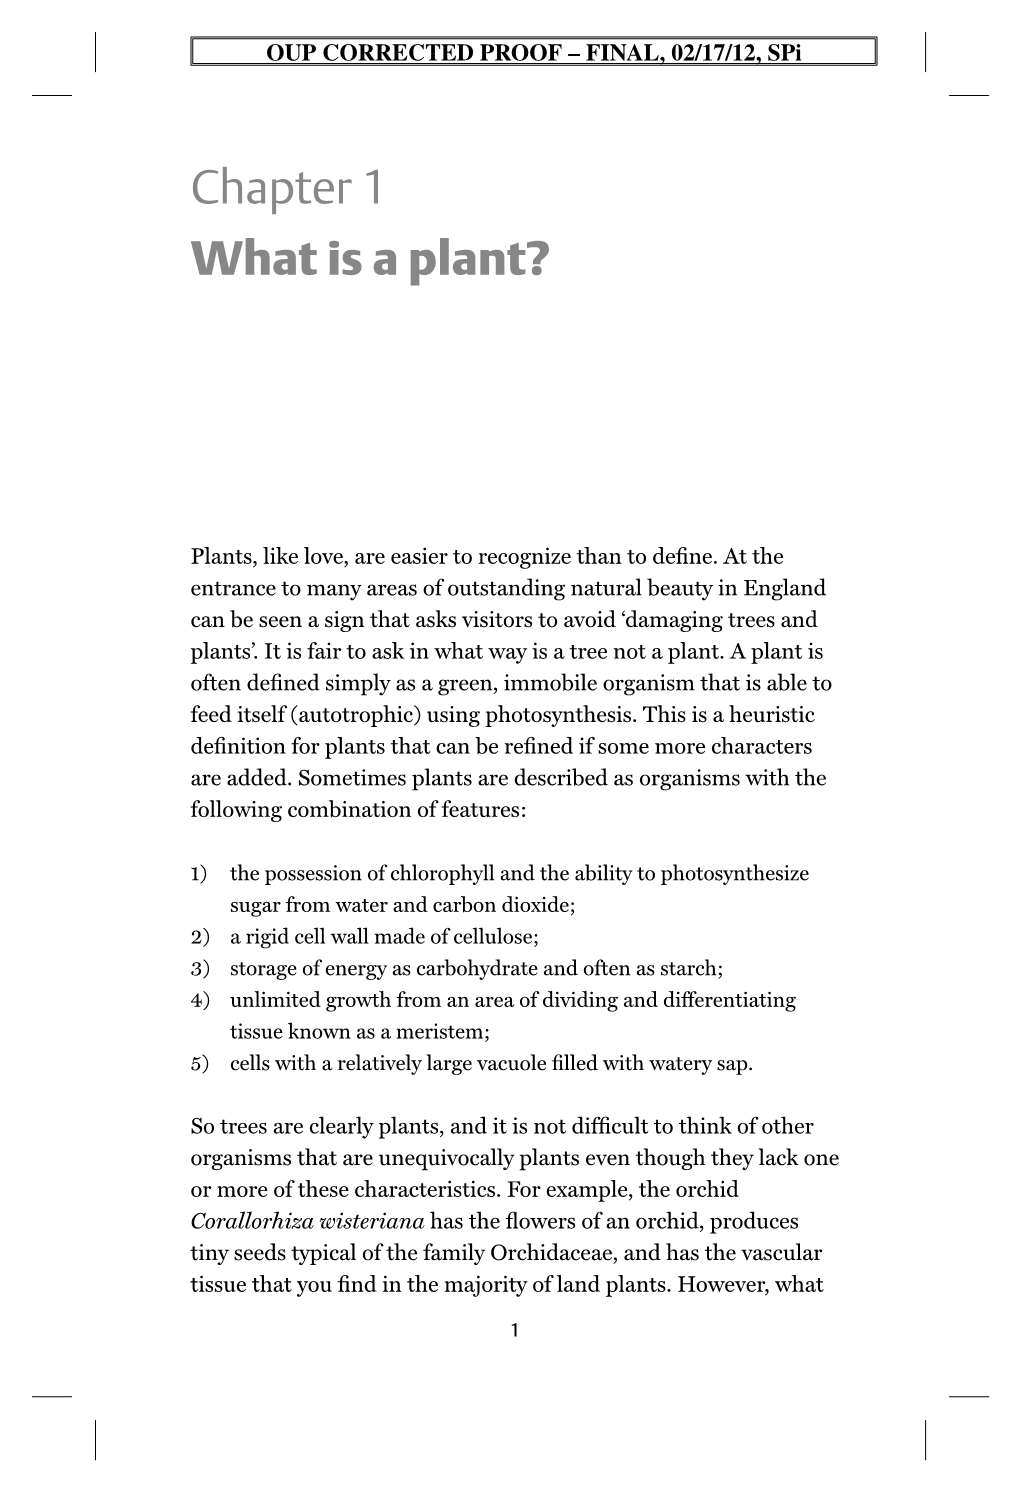 Chapter 1 What Is a Plant?